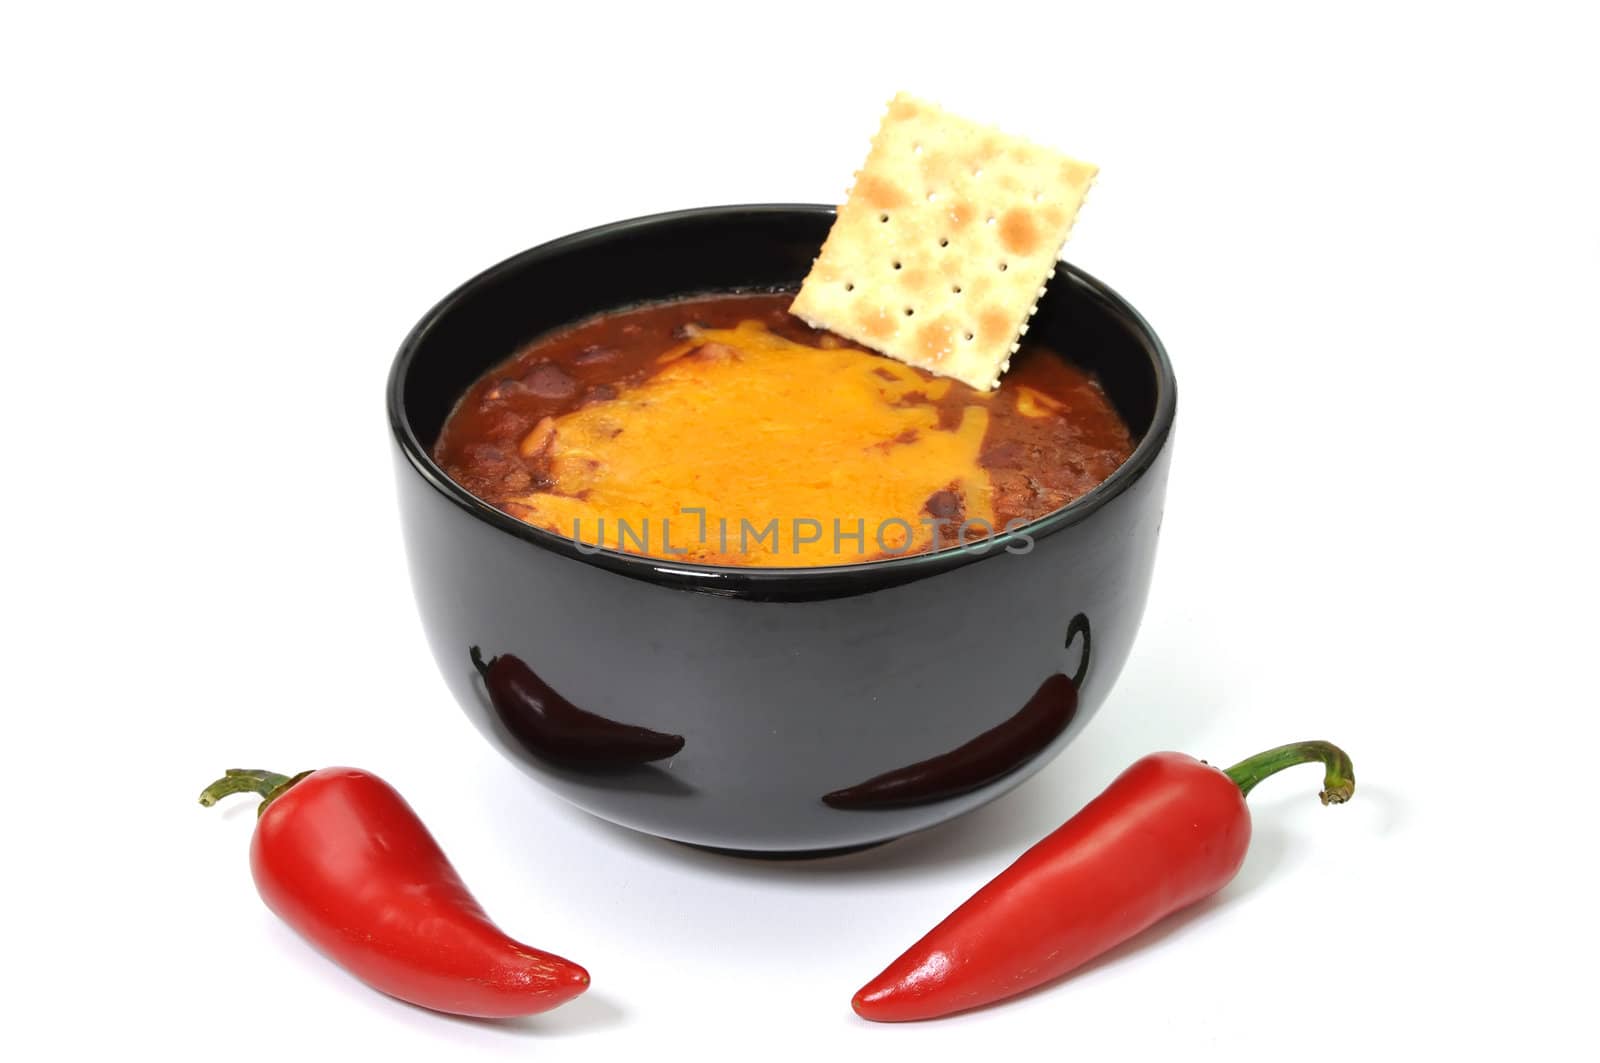 Bowl of chili with melted cheese, cracker,  and red cayenne peppers.  Isolated on white background.